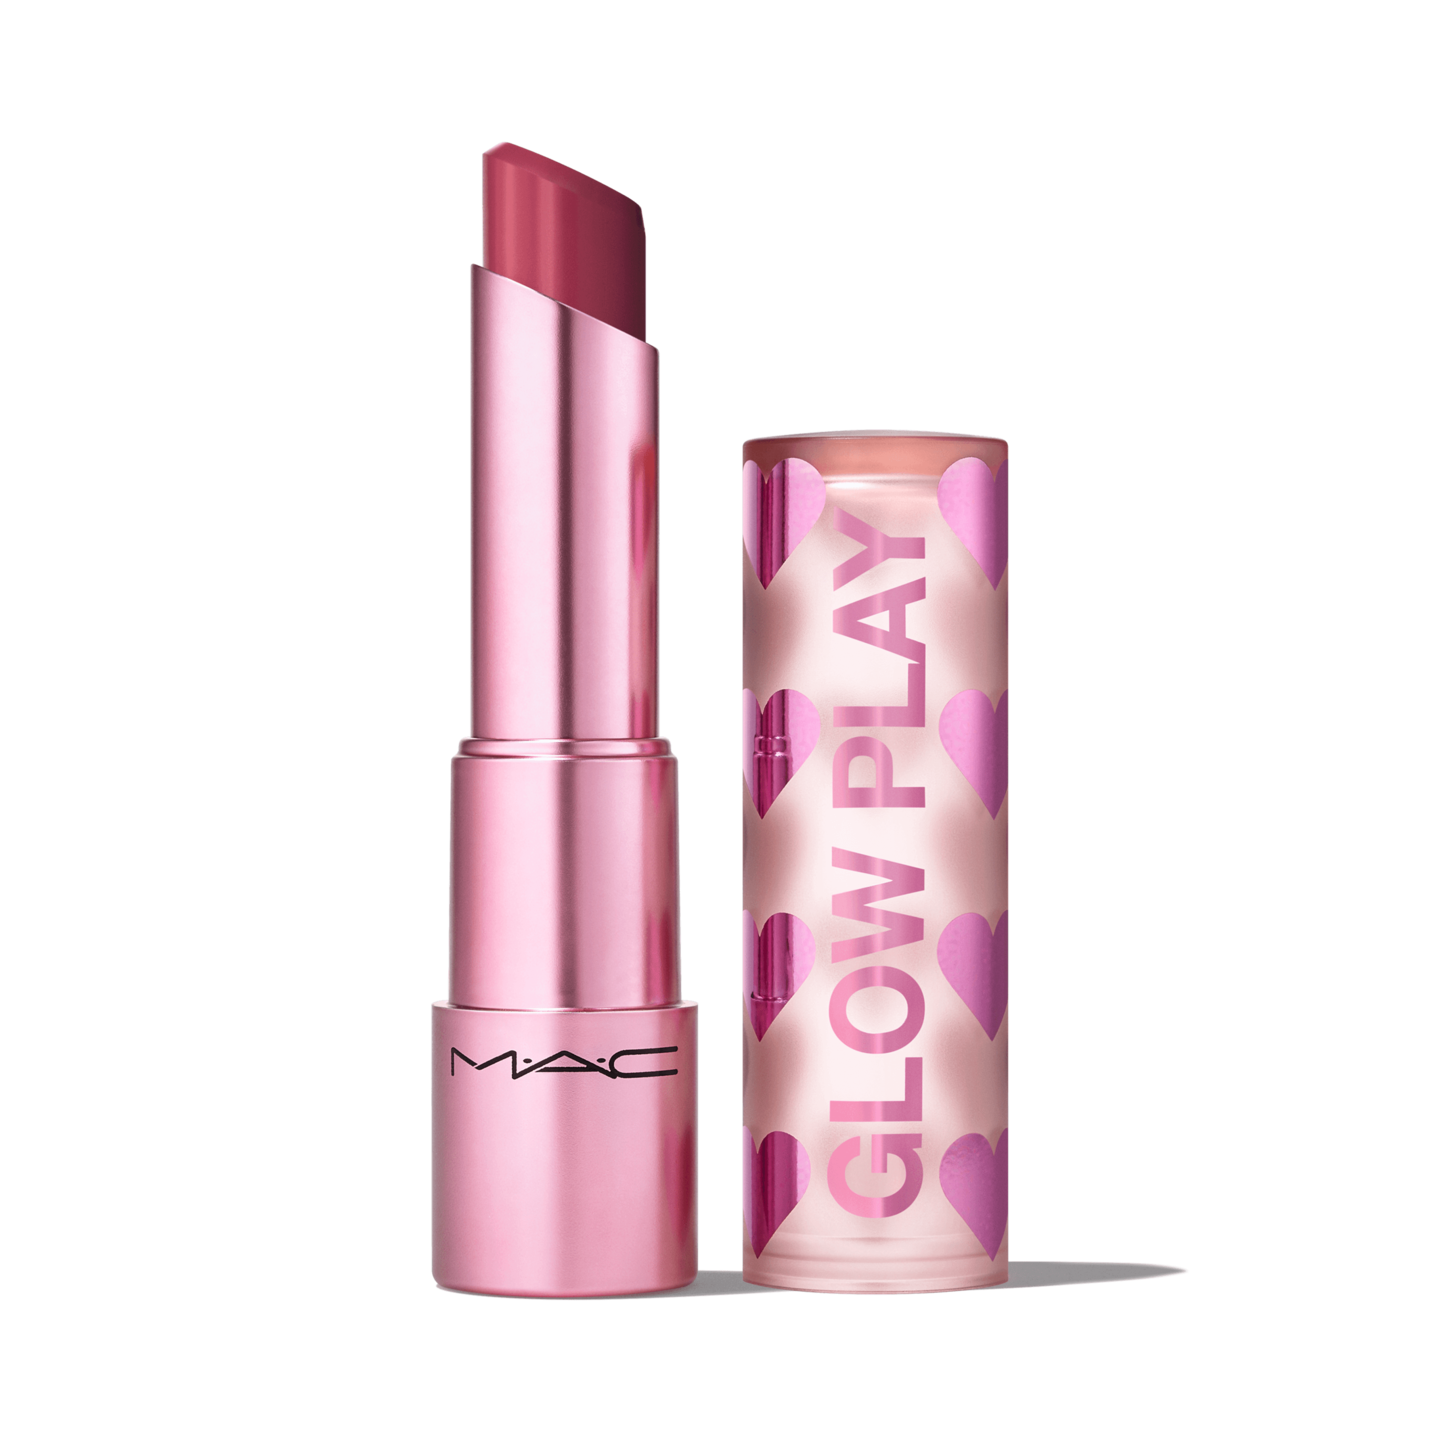 Glow Play Lip Balm / Valentine's Day | MAC Cosmetics - Official Site